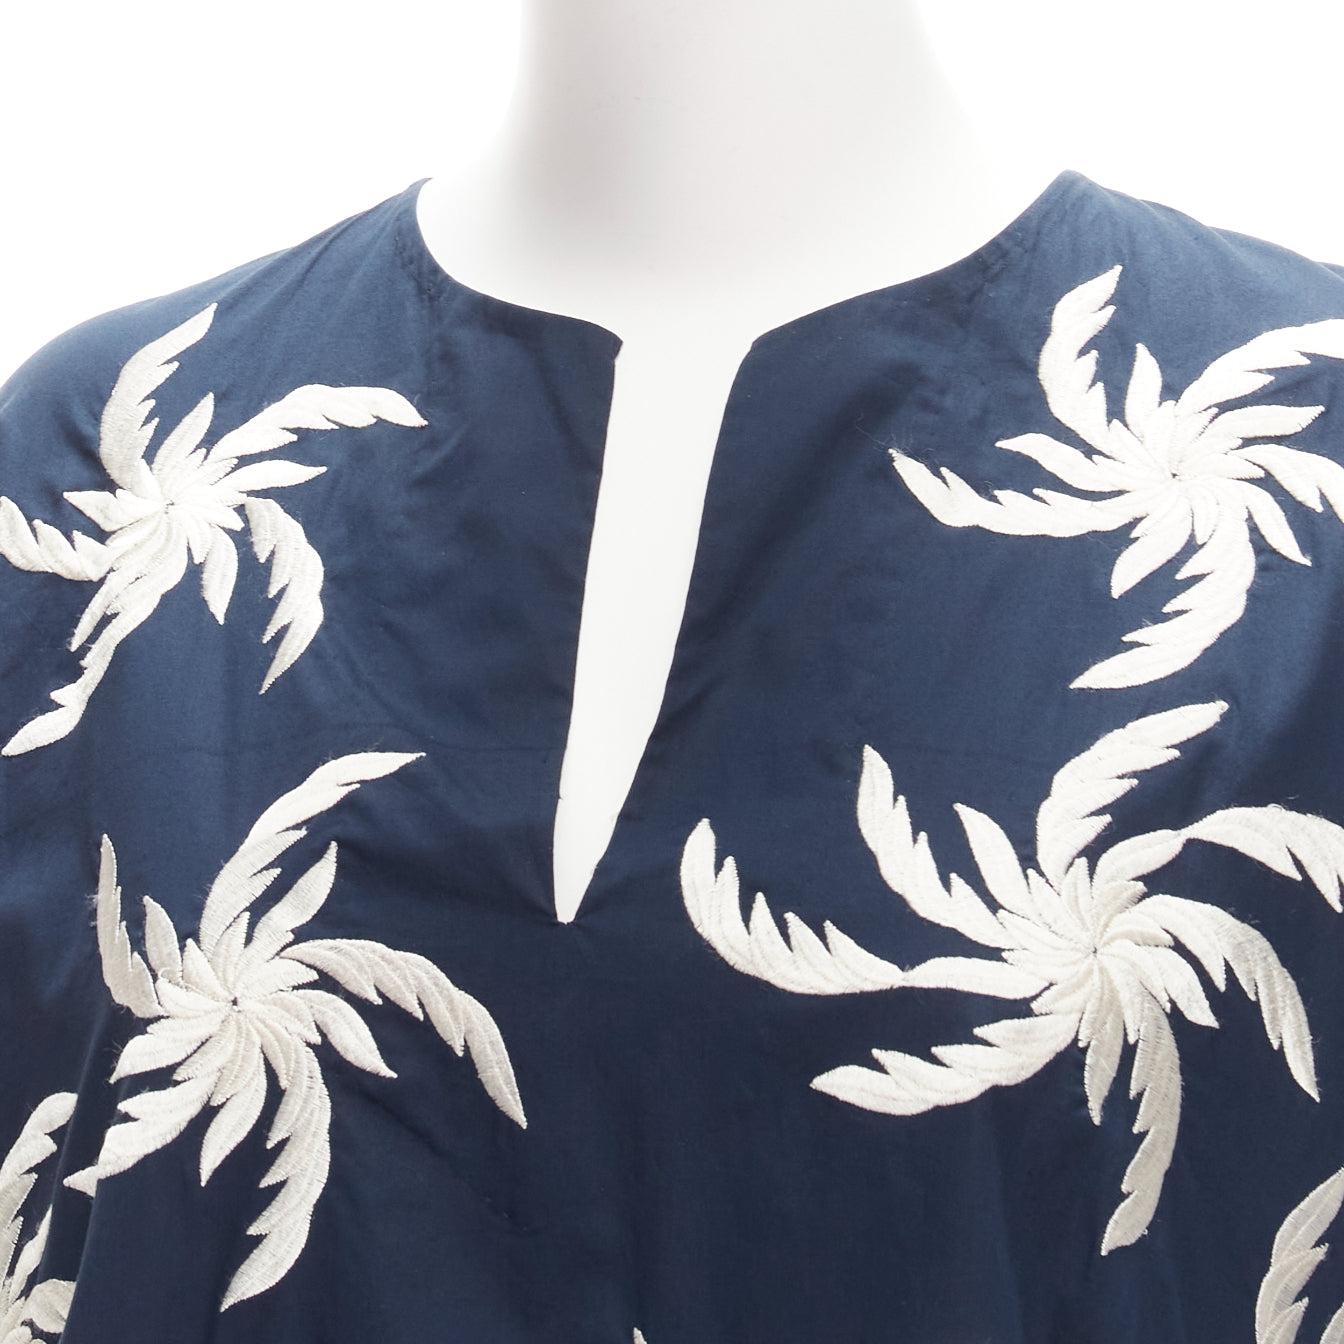 DRIES VAN NOTEN navy white 100% cotton floral embroidery boxy dress XS
Reference: CELG/A00304
Brand: Dries Van Noten
Material: Cotton
Color: Navy, White
Pattern: Floral
Closure: Slip On
Extra Details: Unlined but with satin tape at collar and